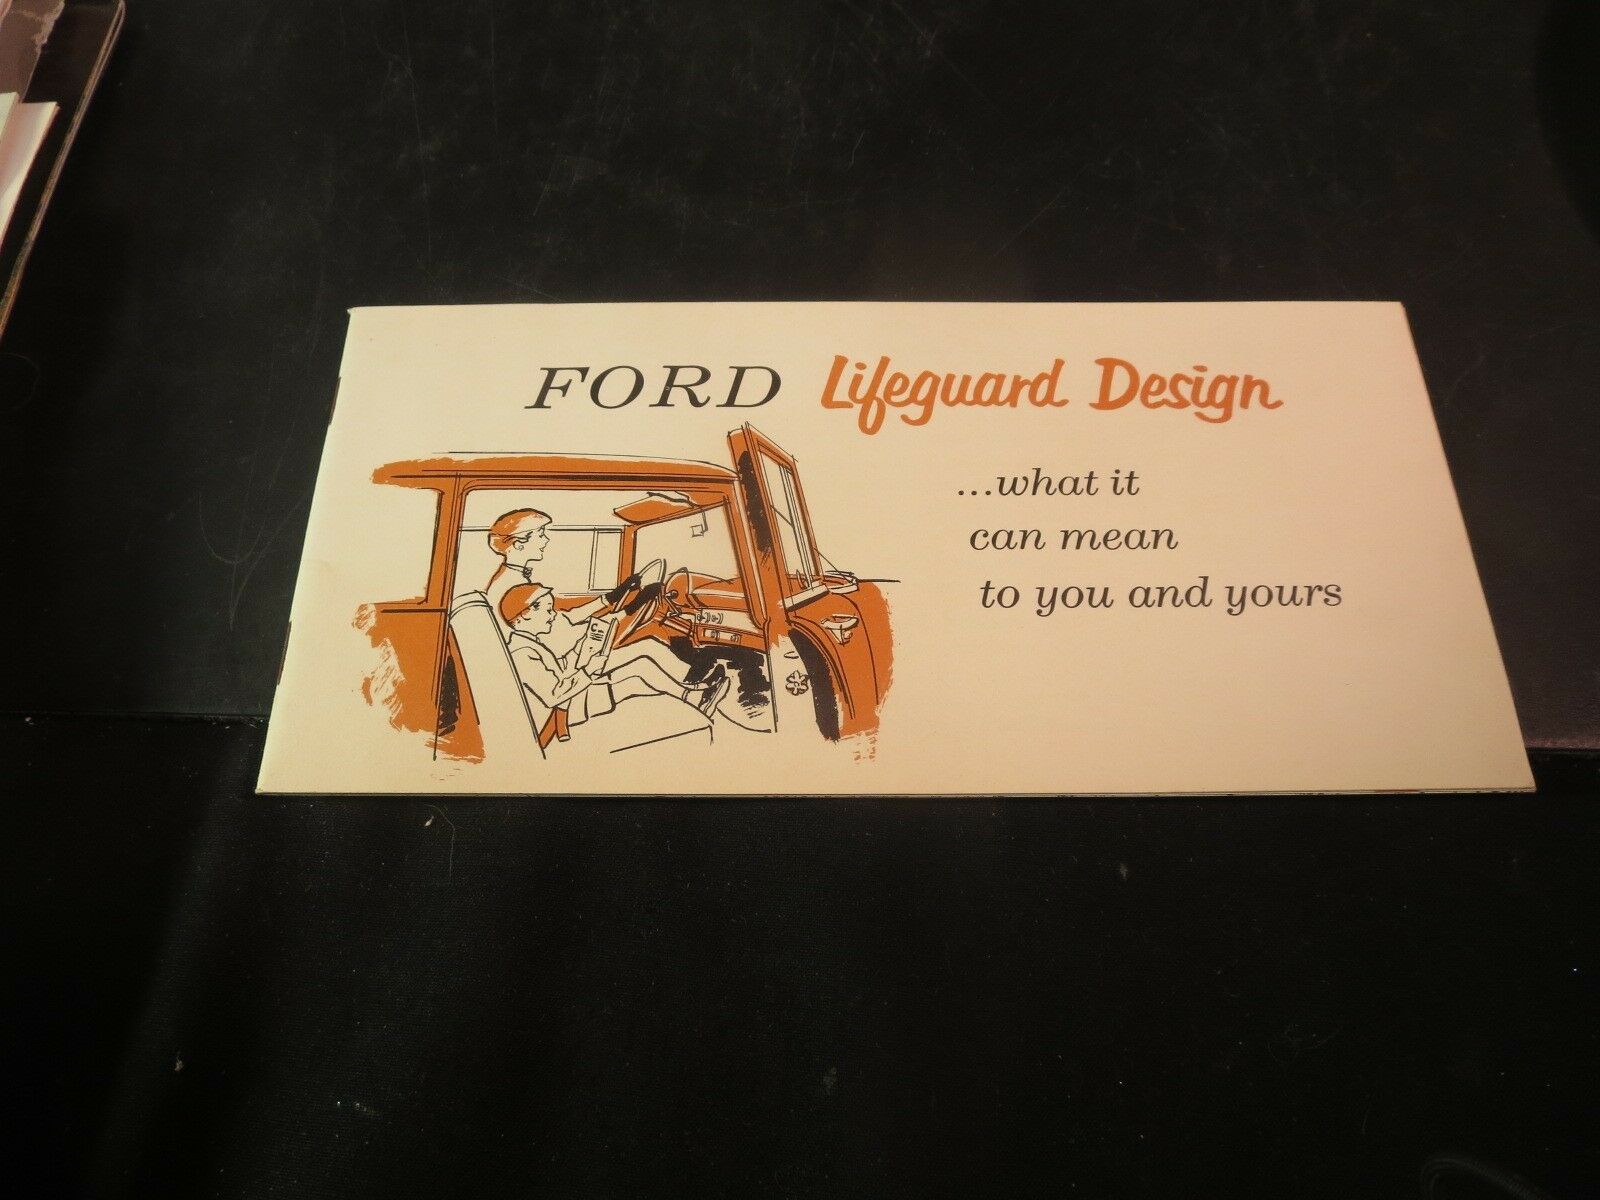 1956 Ford Safety Brochure "lifeguard Design"